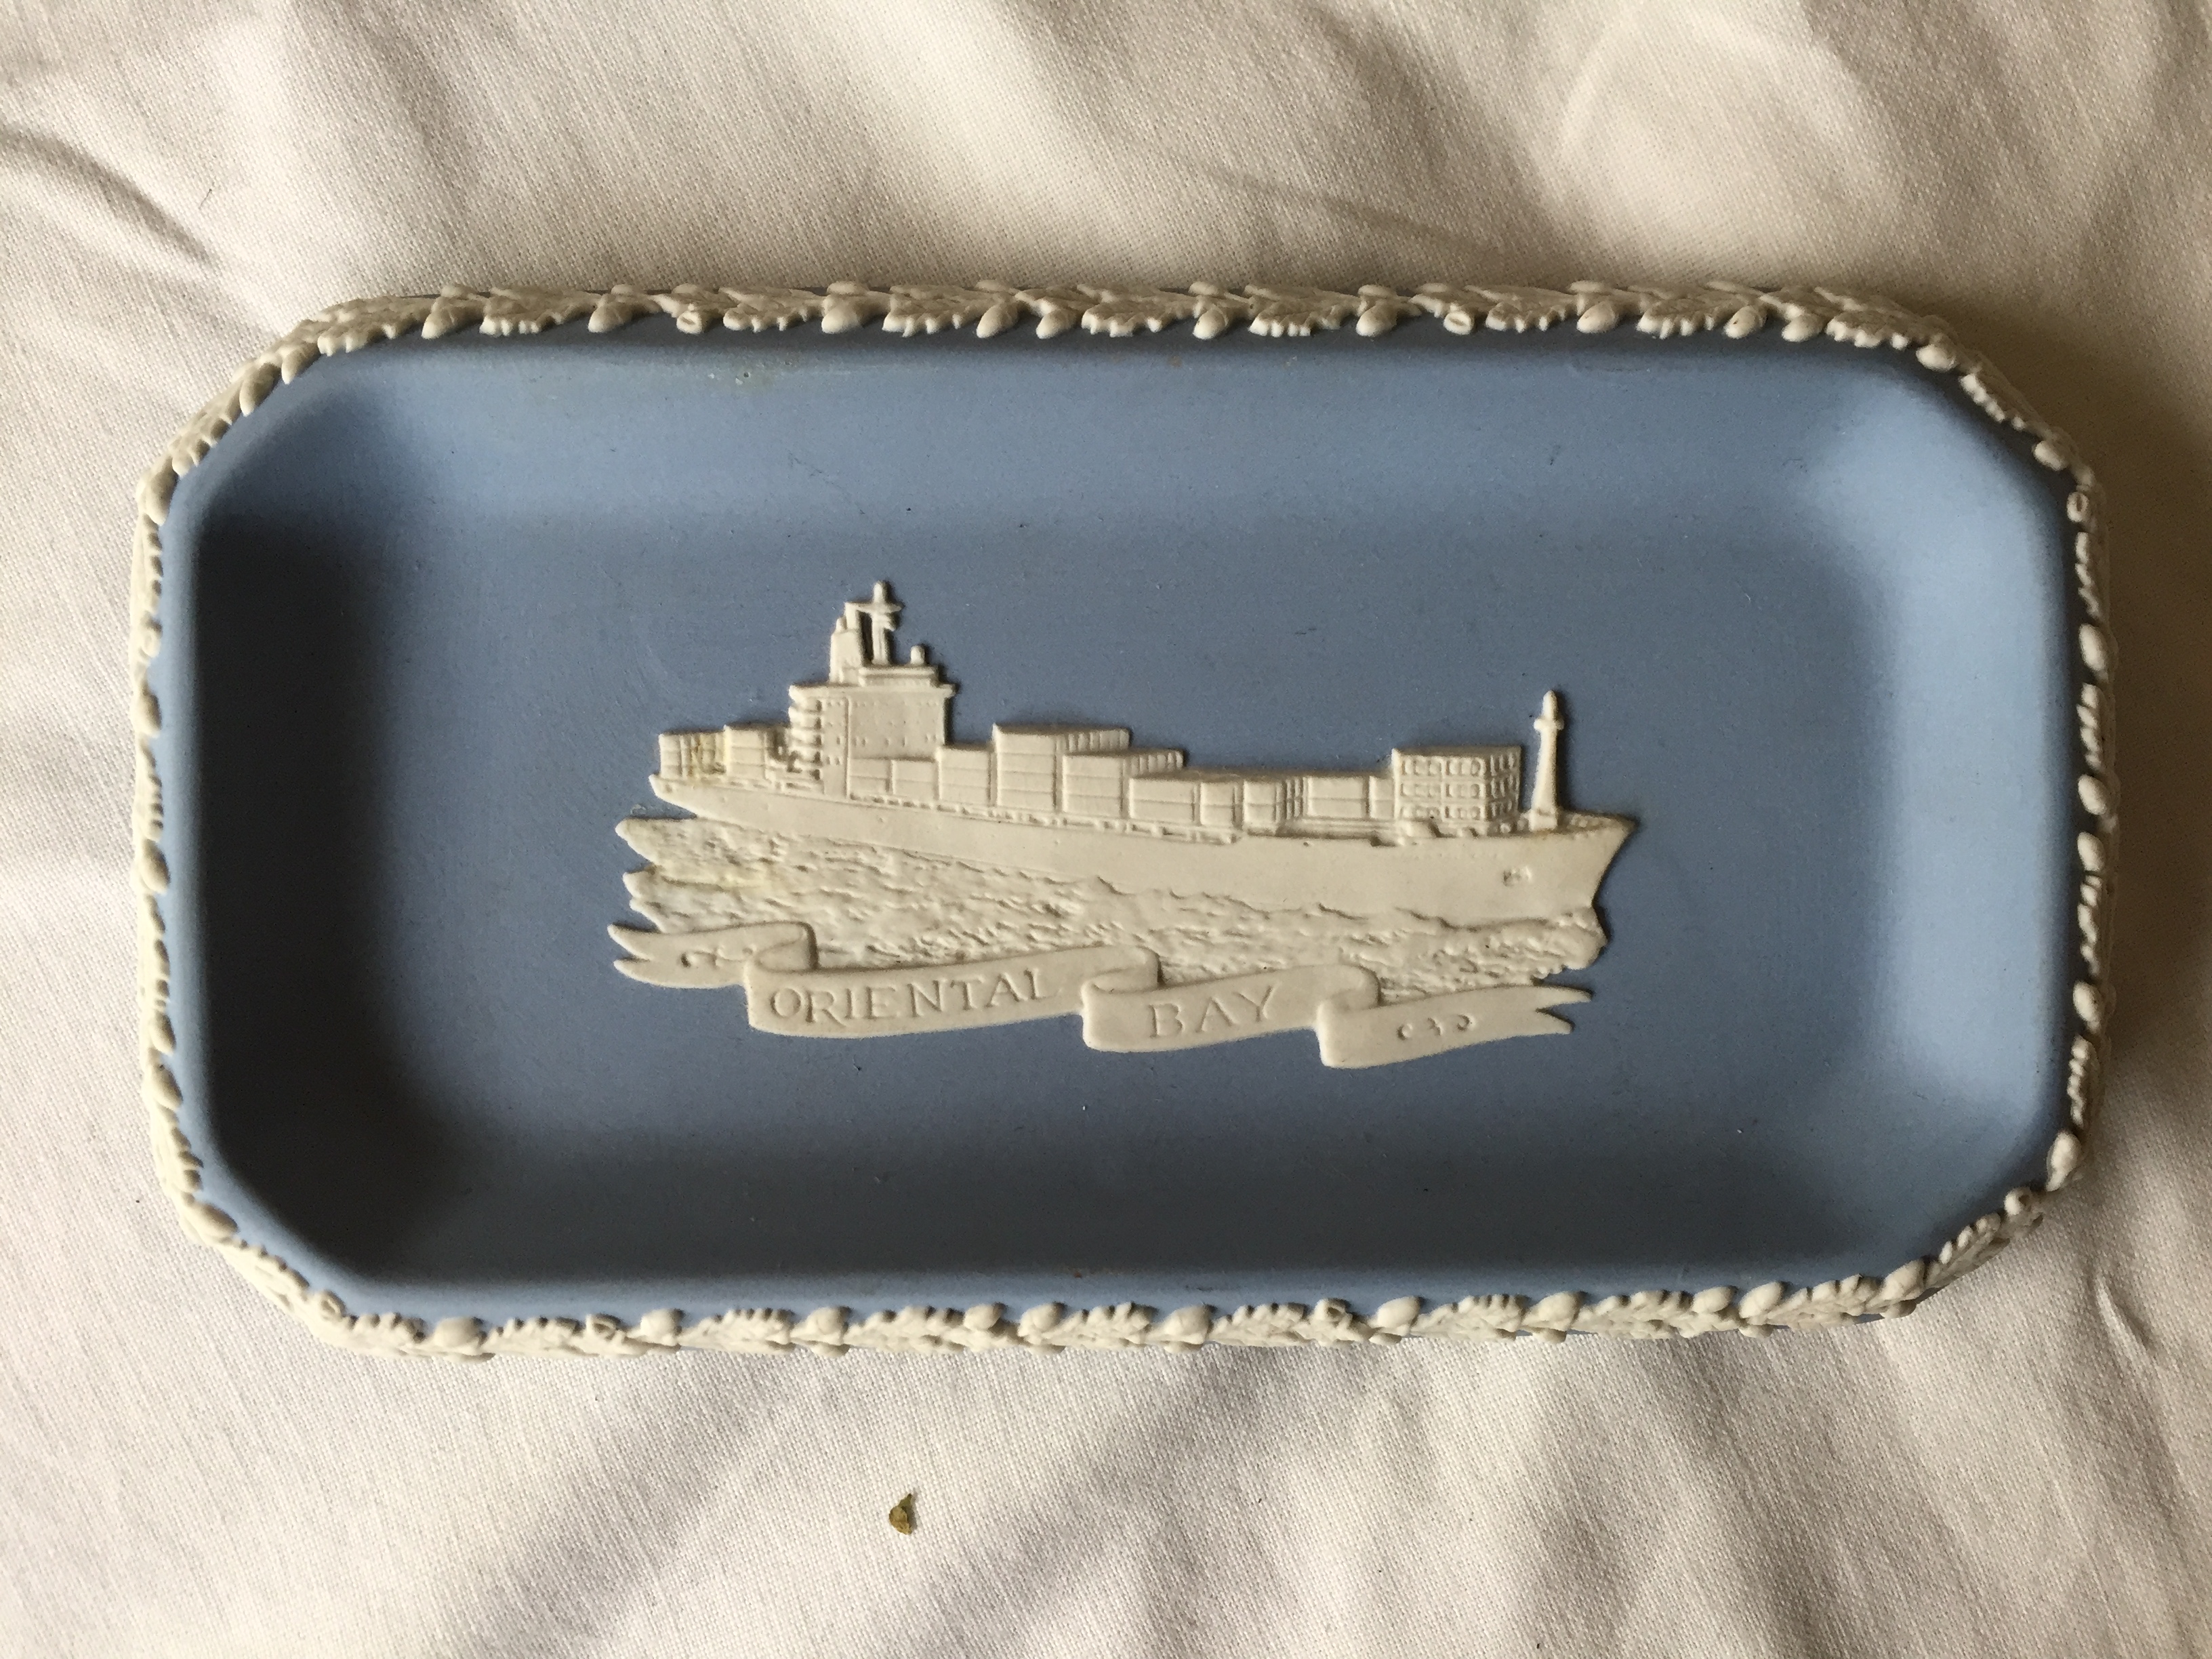 SMALL WEDGEWOOD DISH FROM THE ORIENTAL BAY CONTAINER COMPANY